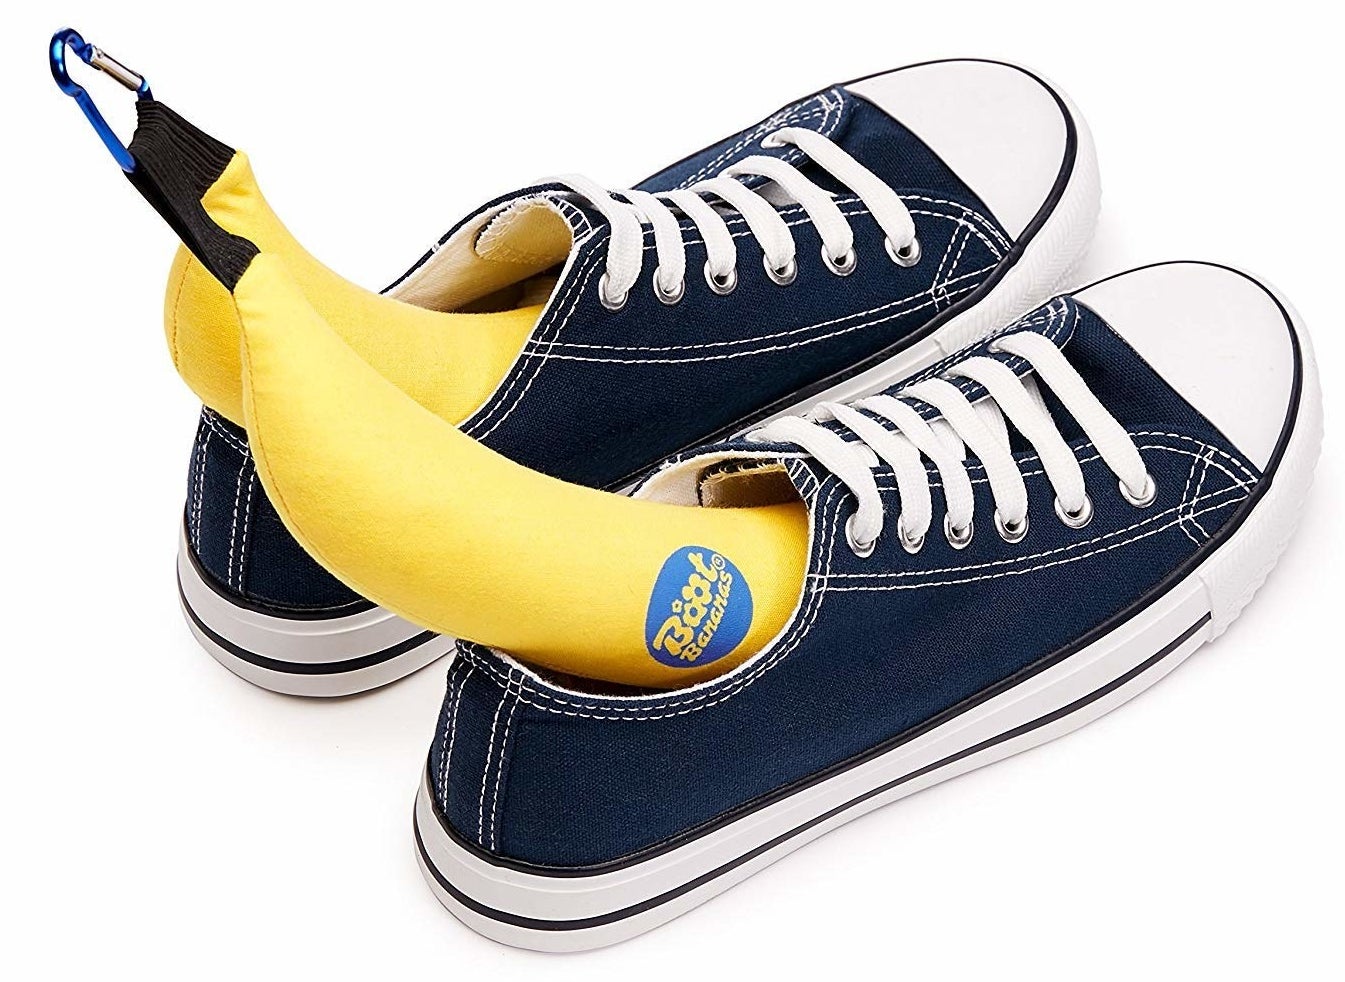 The banana-shaped deodorizers half inserted into a pair of tennis shoes